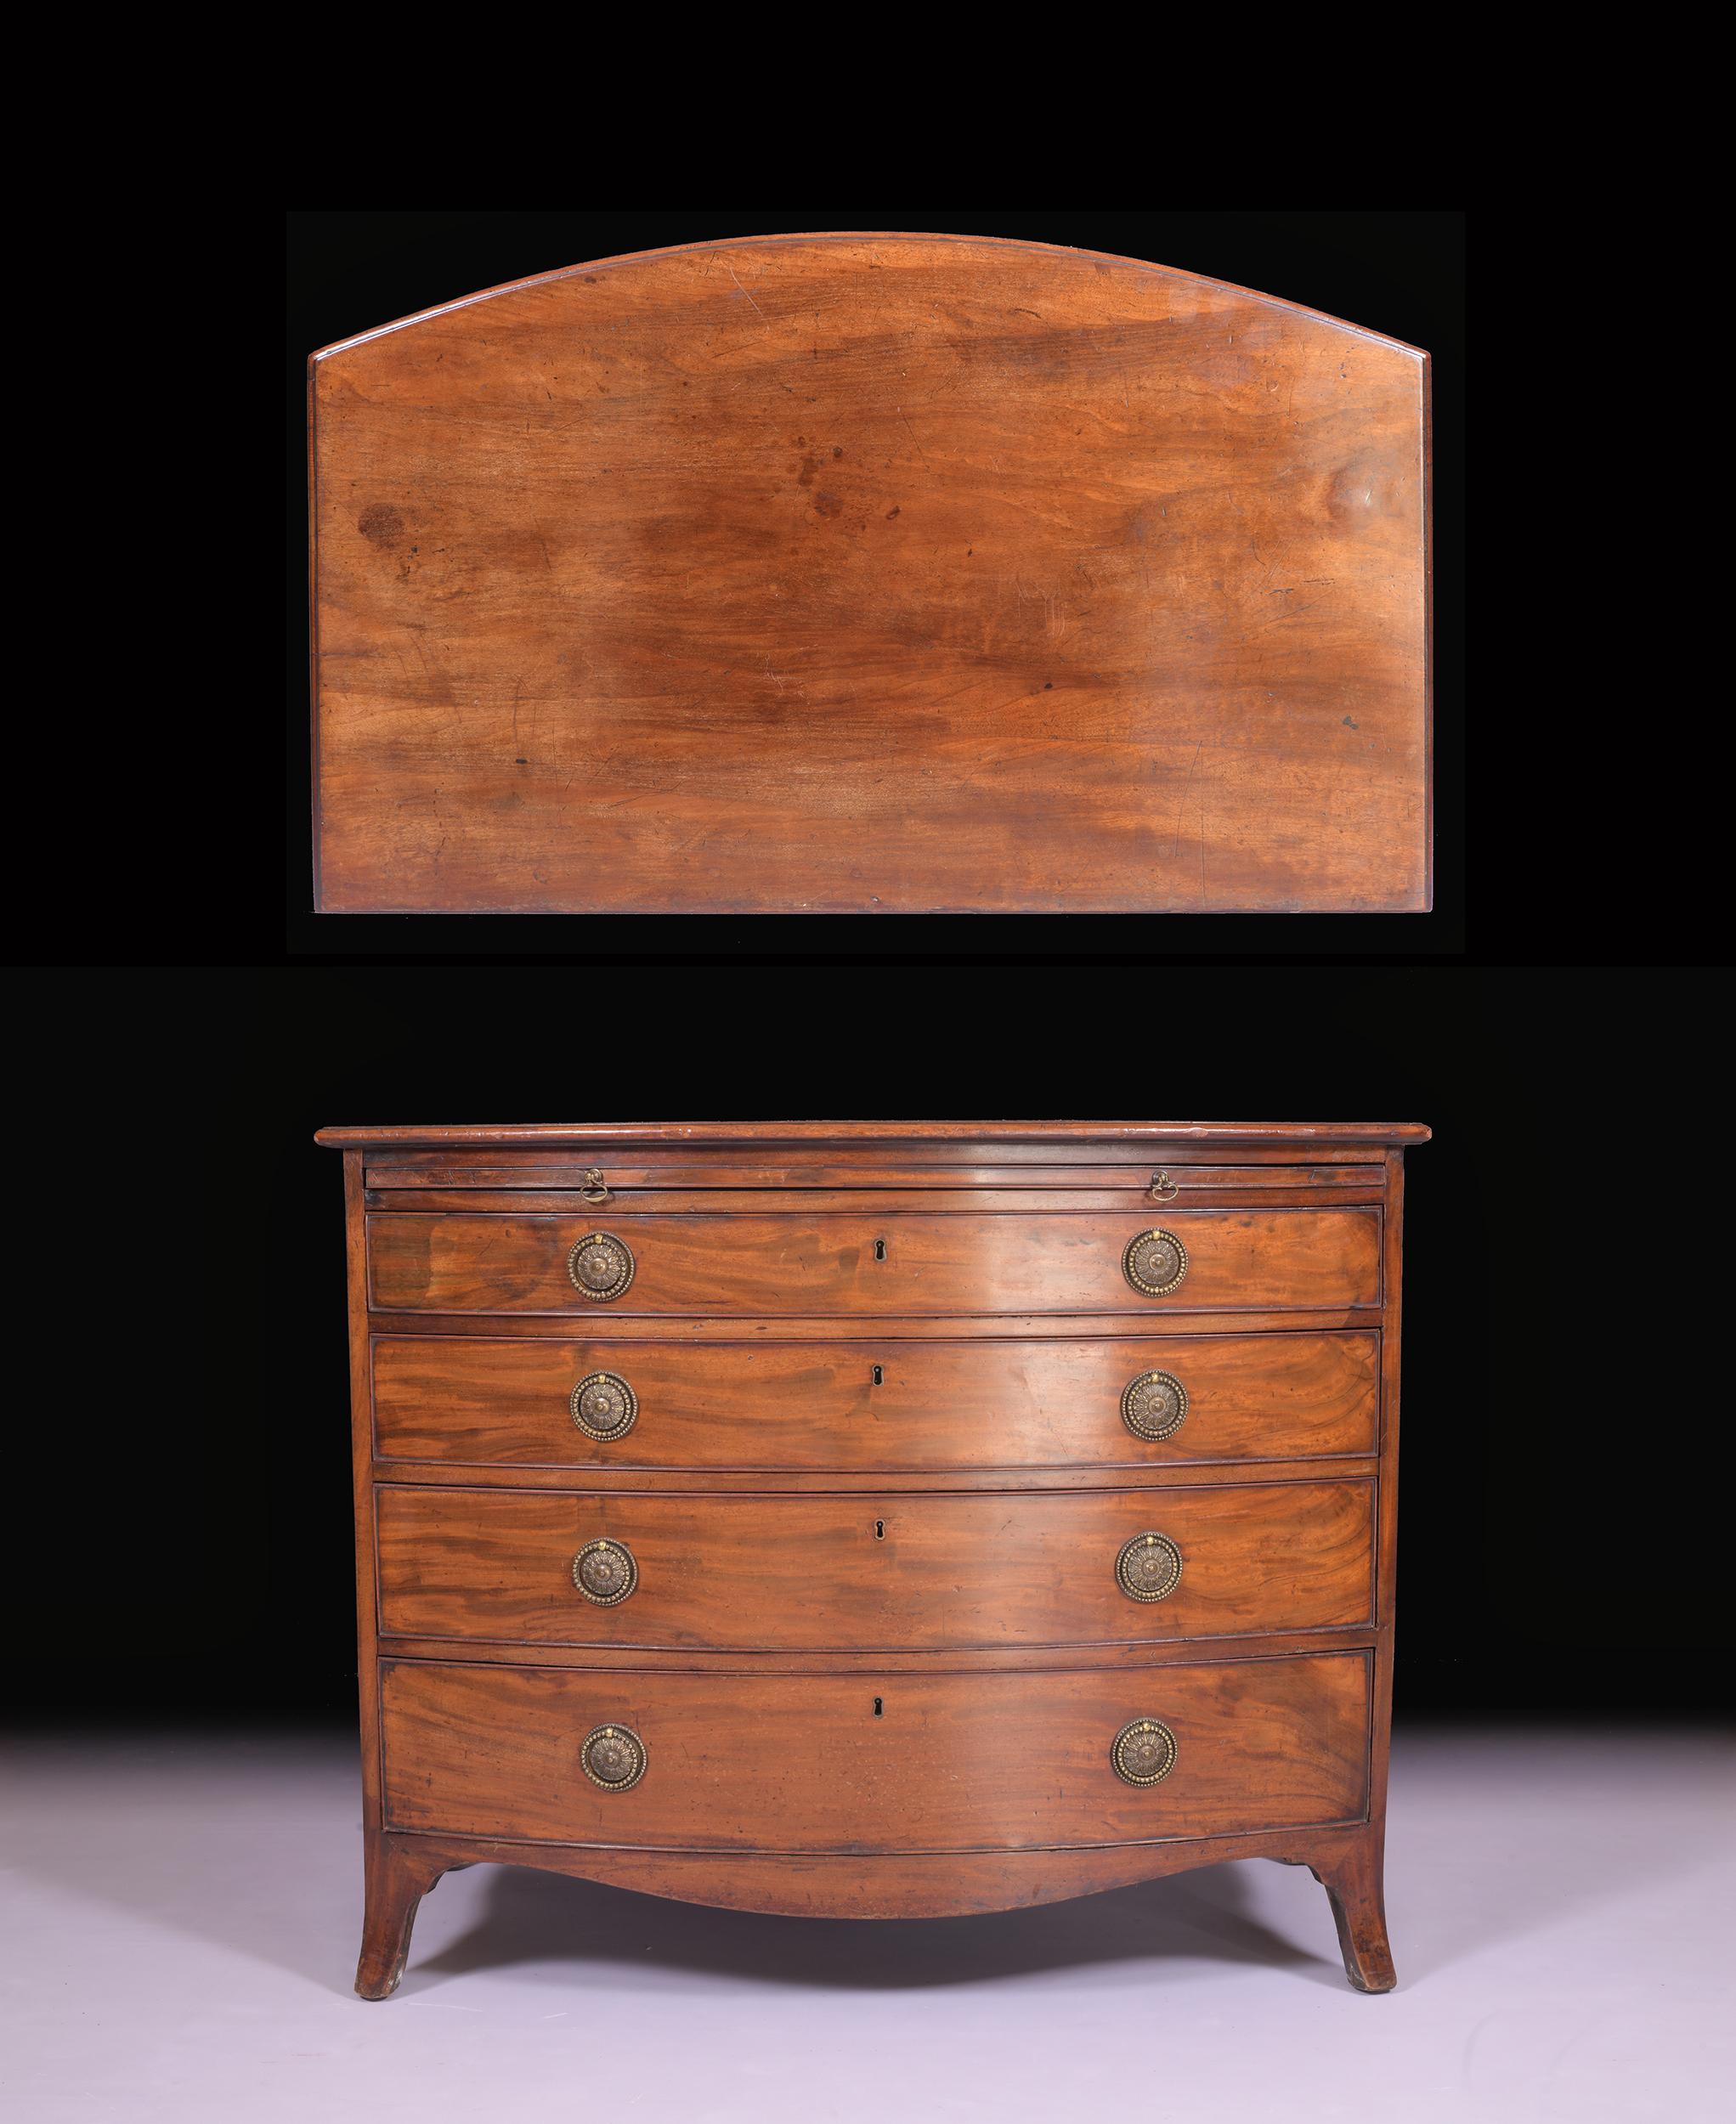 A fine antique Georgian mahogany bow front chest of drawers. The bow front top with figured mahogany above a slide and an arrangement of four long graduating drawers, each with decorative brass plates and drop handles. The mahogany bow front chest